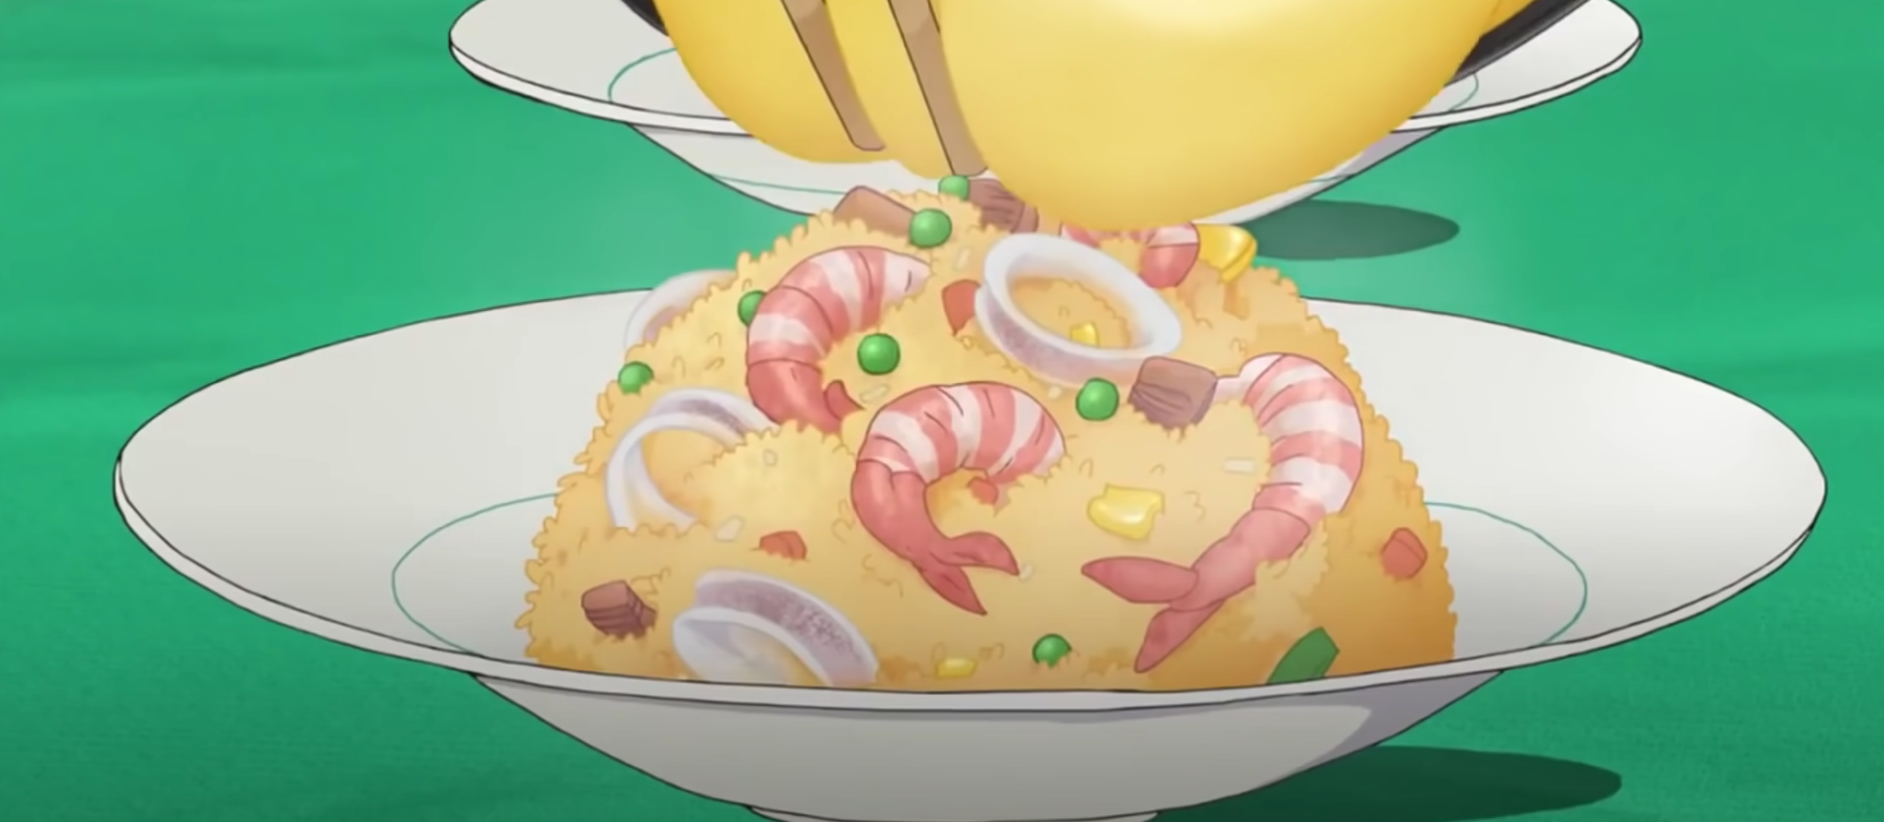 The 20 Most Awesome Anime Foods of All-Time